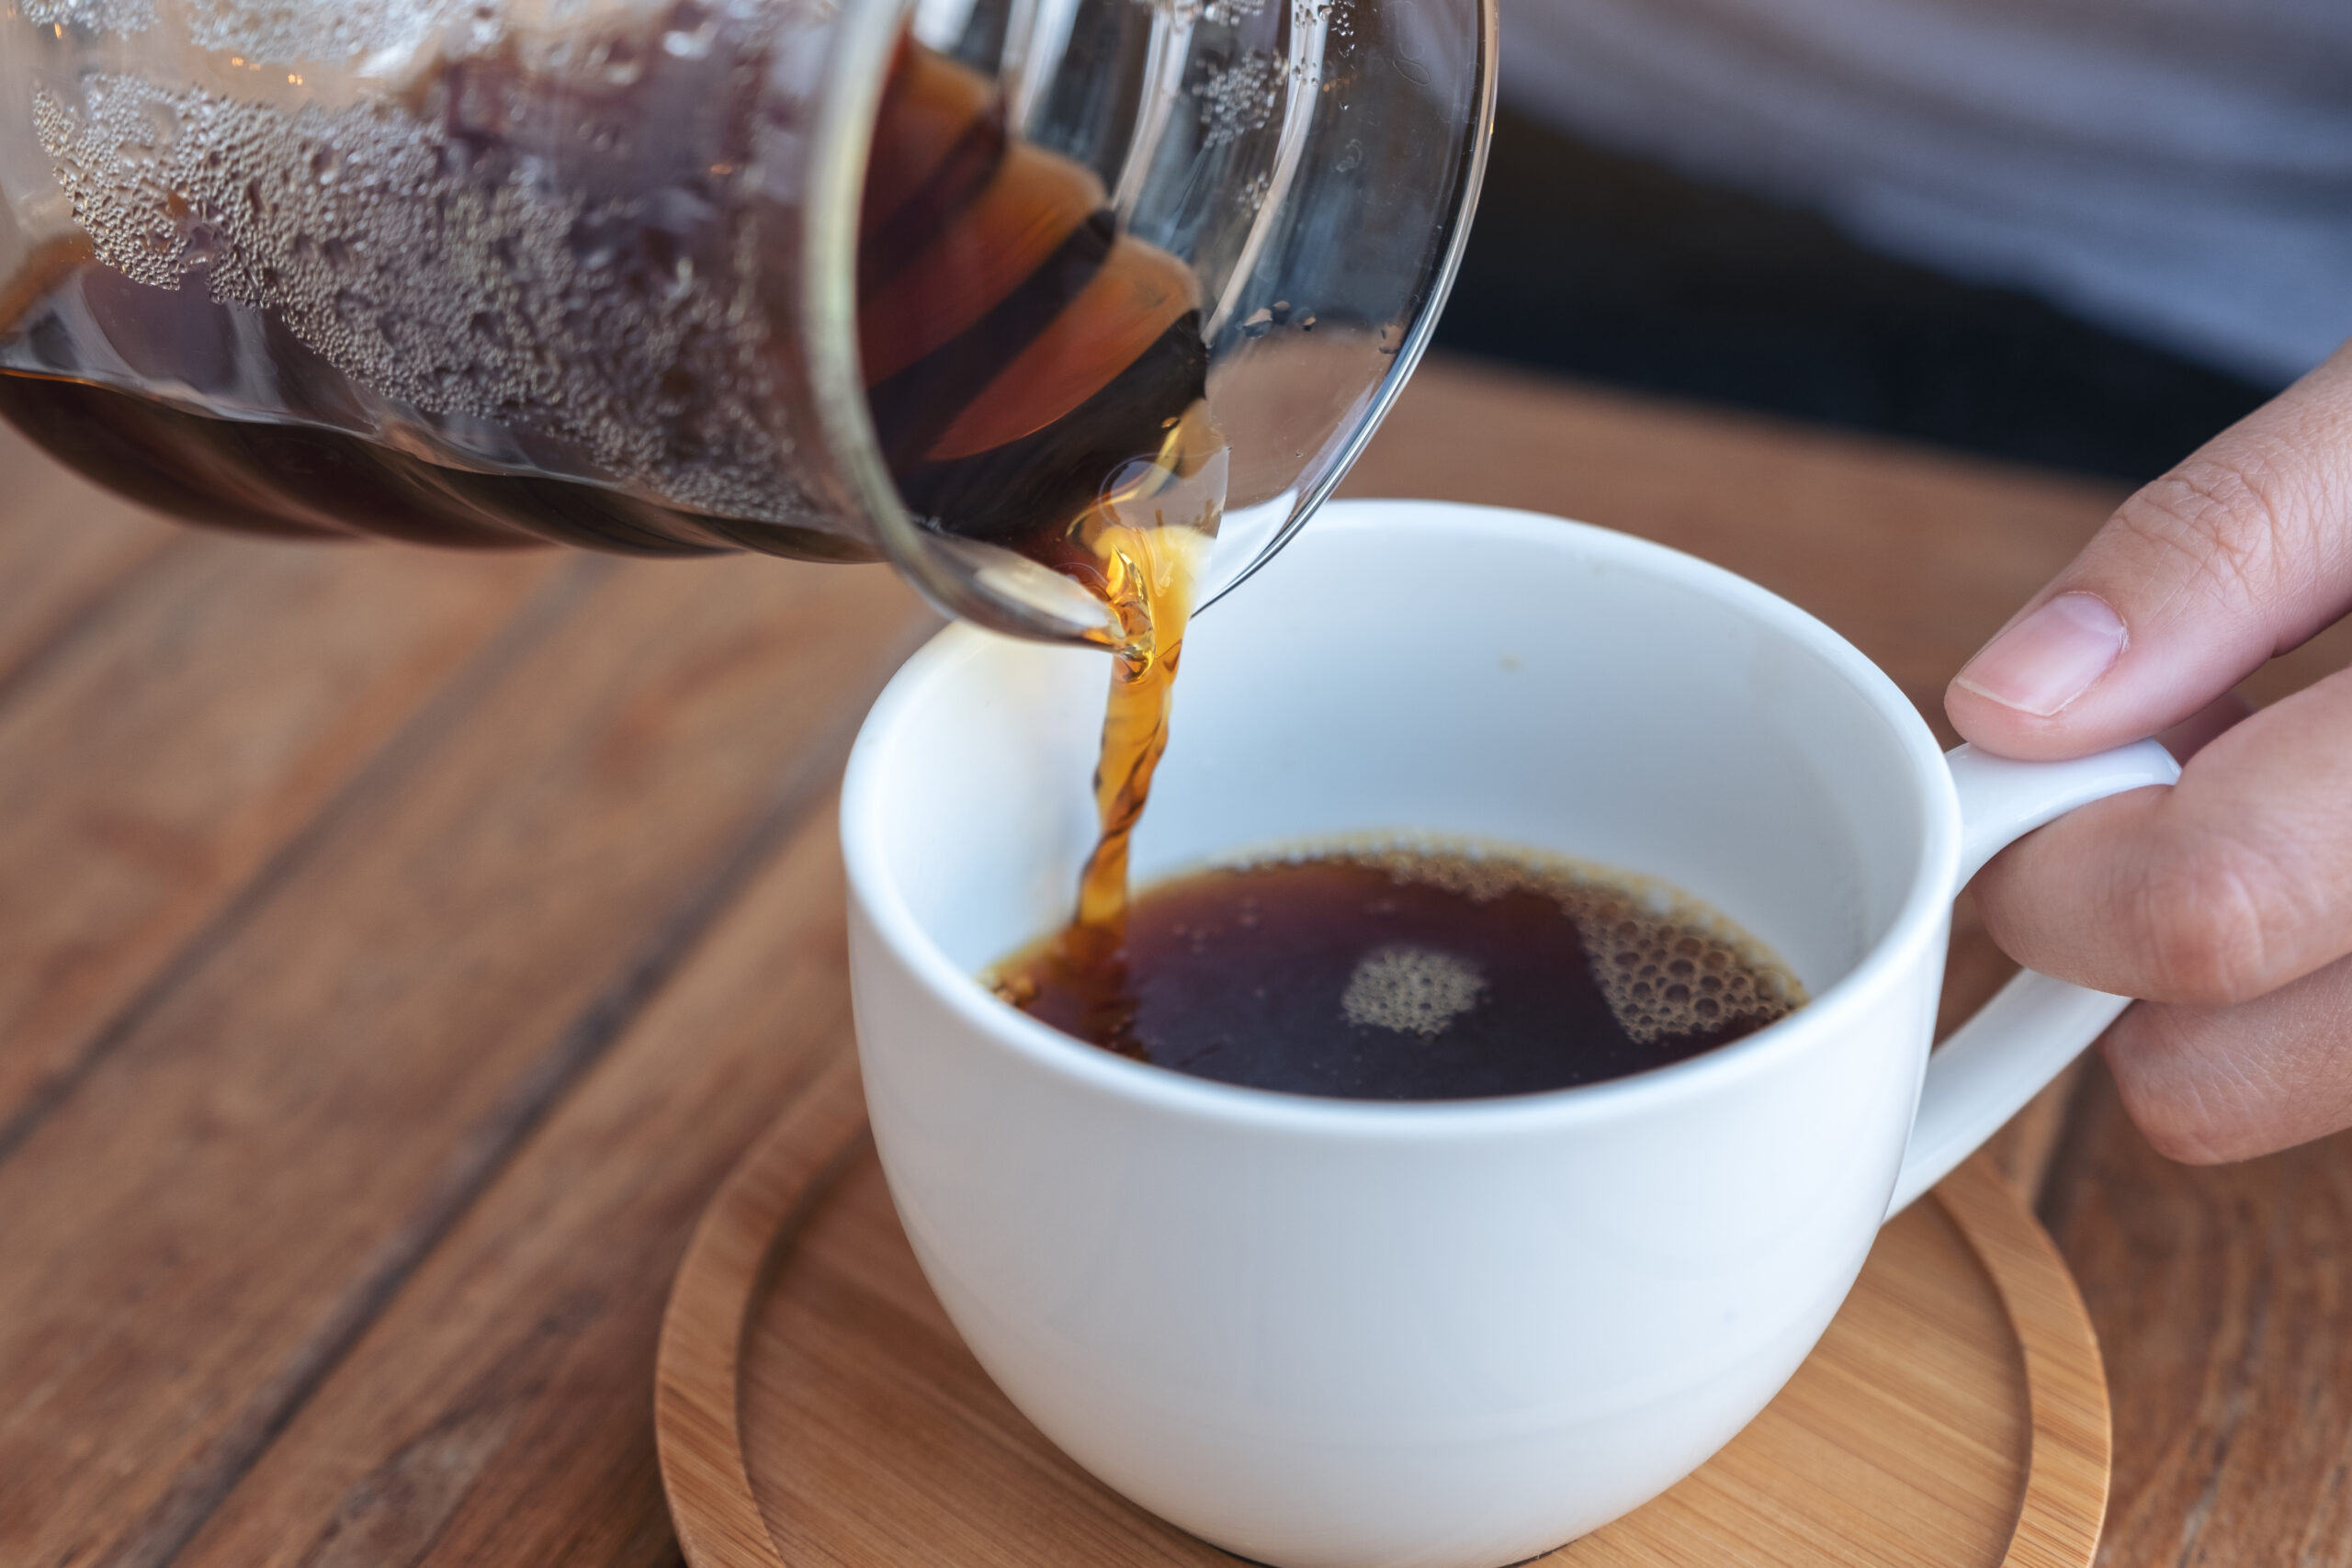 Closeup image of a hand pouring drip coffee into a white mug on vintage wooden table